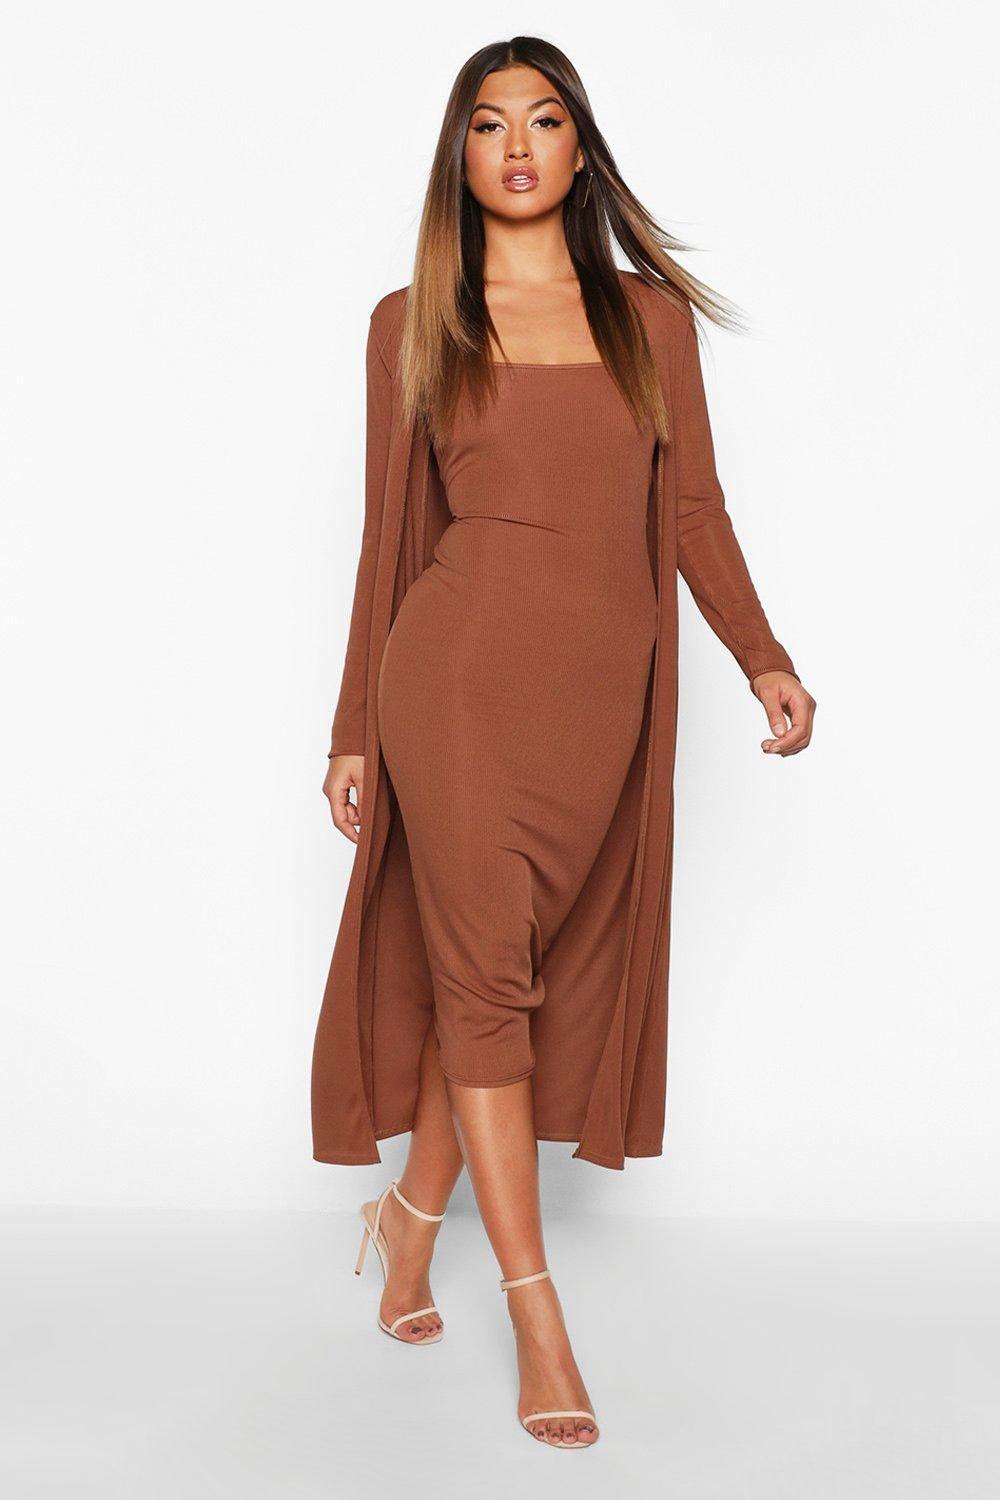 Boohoo Ribbed Midi Dress And Duster Set in Brown | Lyst